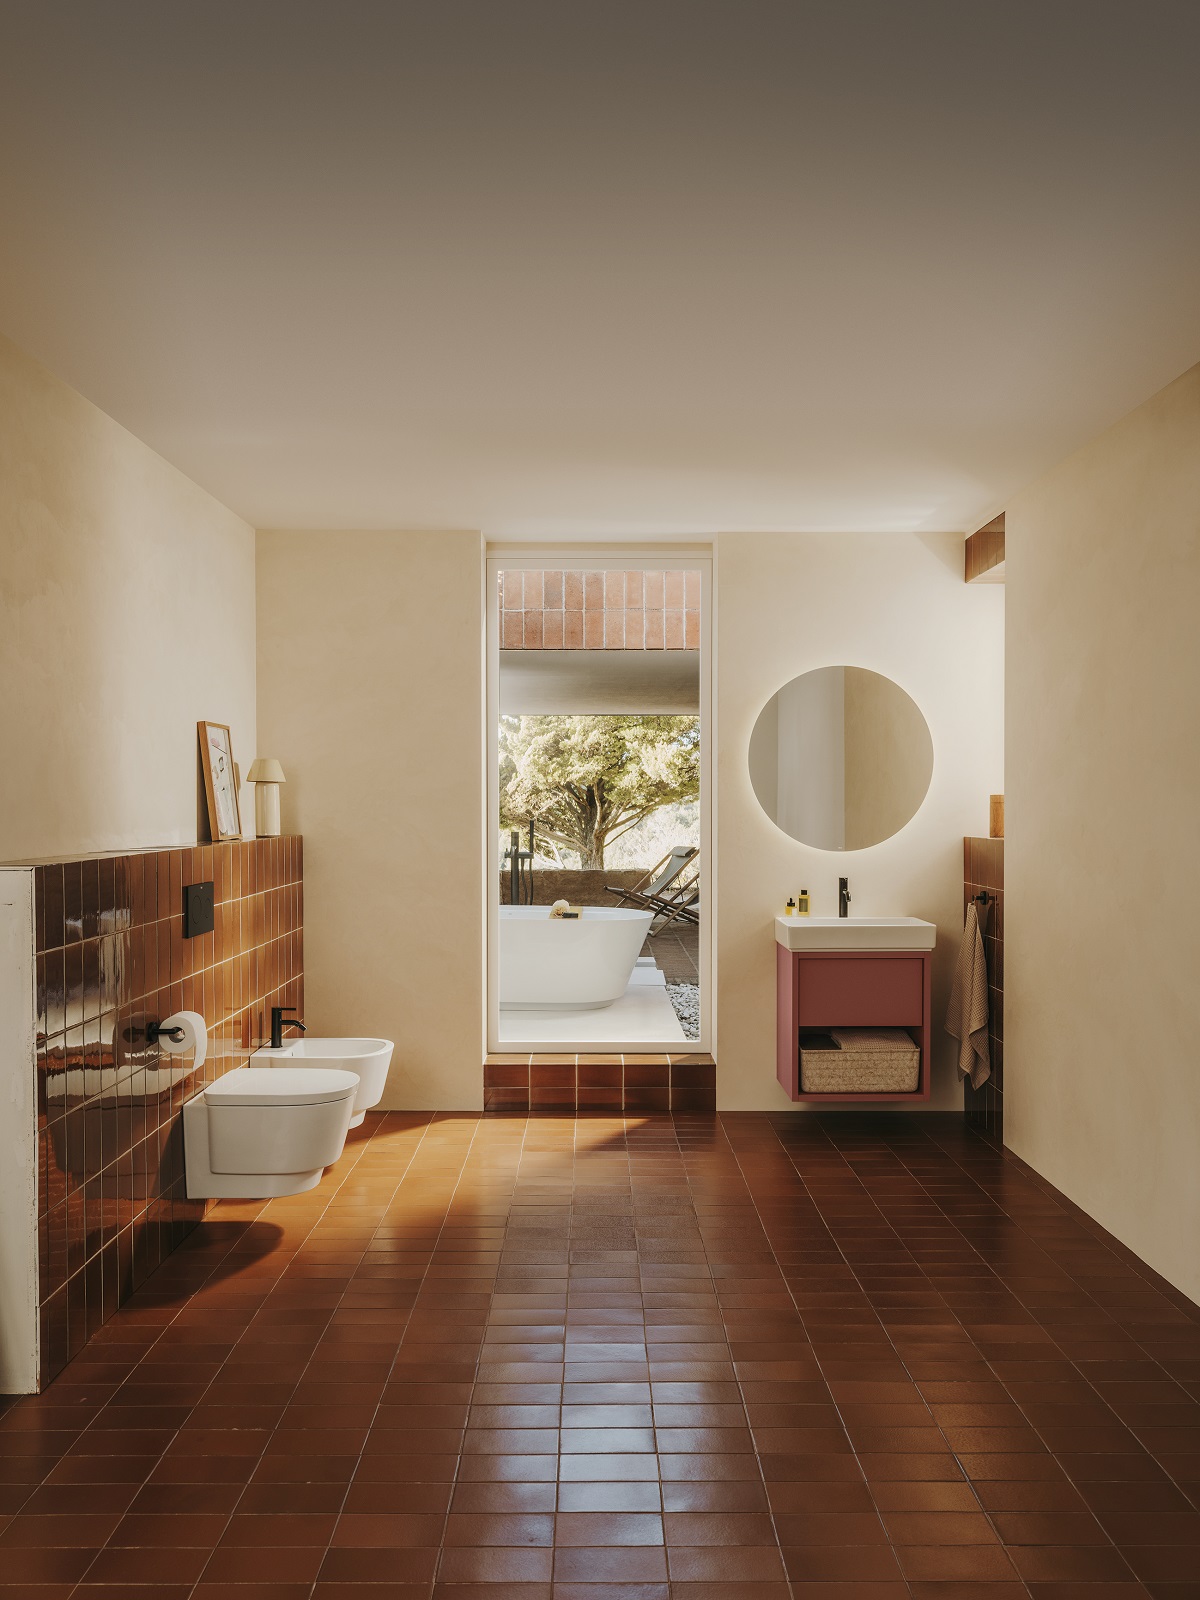 terracotta floor tiles leading out to outdoor bath in Mediterranean inspired bathroom by Roca